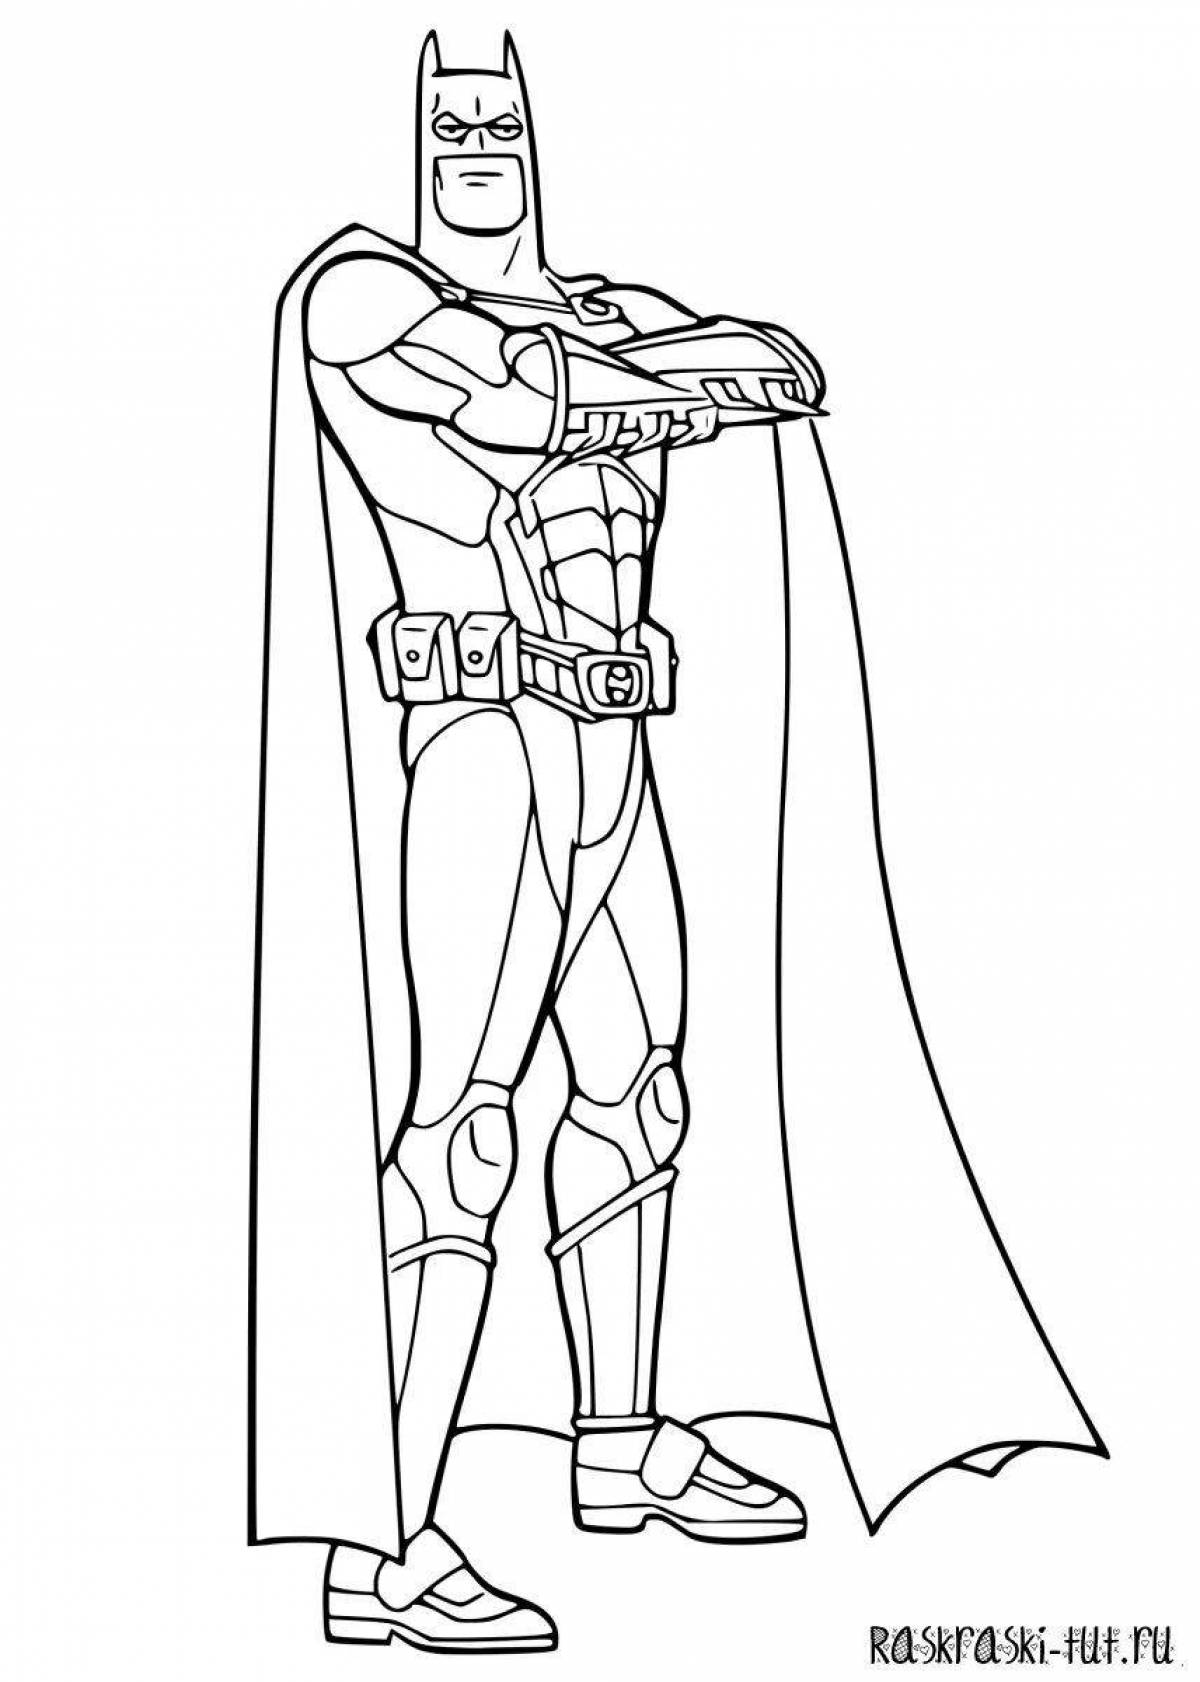 Glamourous dark knight coloring book